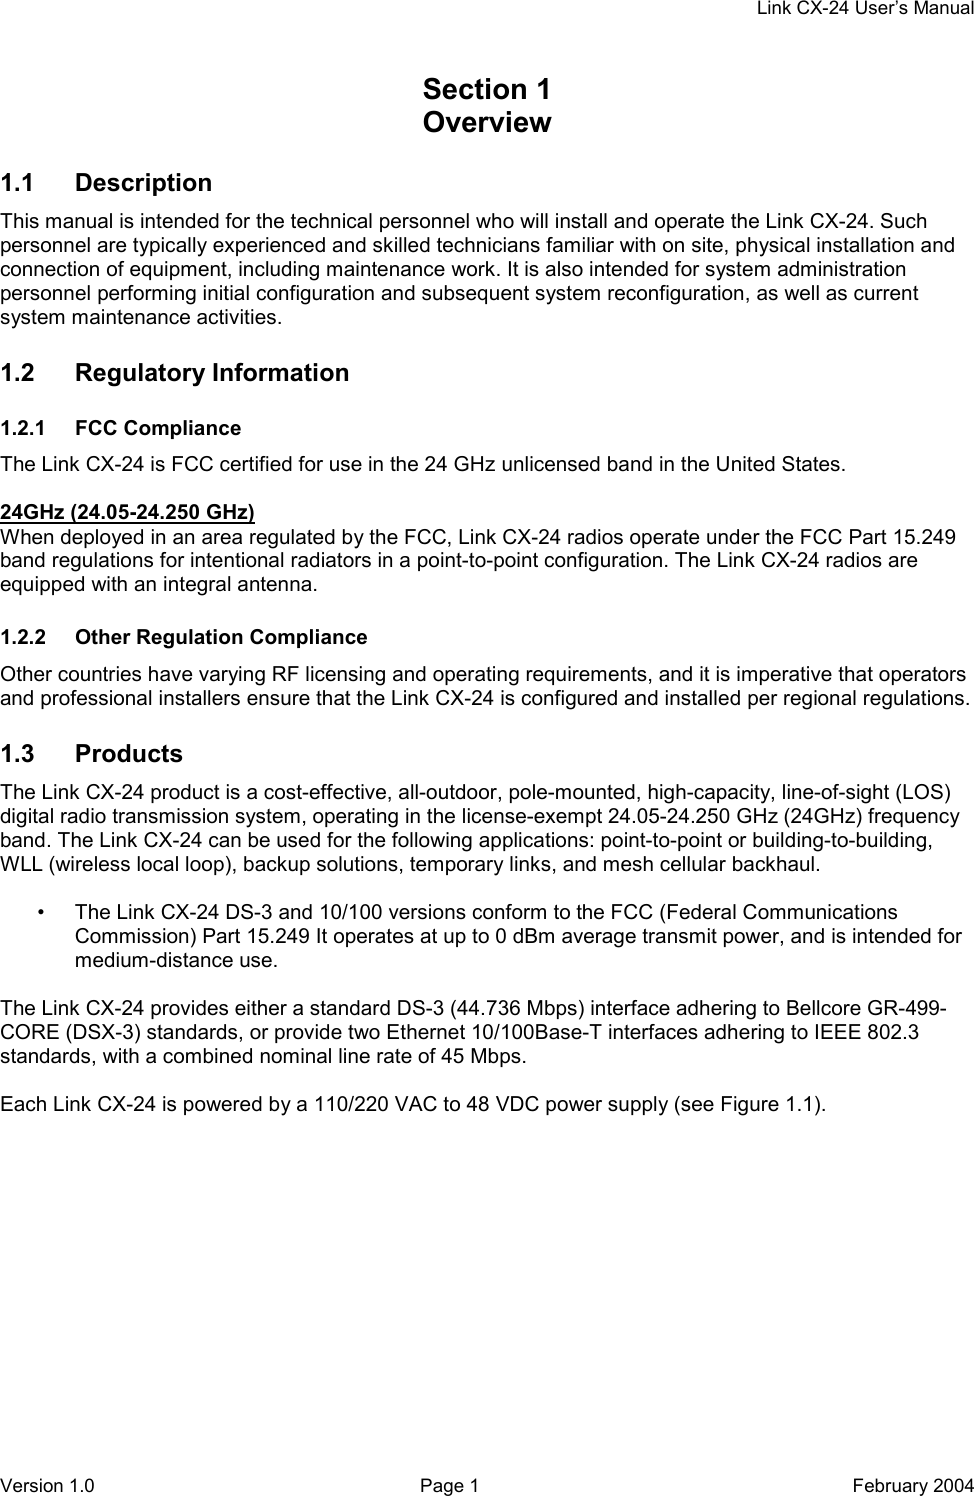     Link CX-24 User’s Manual Version 1.0  Page 1  February 2004 Section 1    Overview 1.1 Description This manual is intended for the technical personnel who will install and operate the Link CX-24. Such personnel are typically experienced and skilled technicians familiar with on site, physical installation and connection of equipment, including maintenance work. It is also intended for system administration personnel performing initial configuration and subsequent system reconfiguration, as well as current system maintenance activities. 1.2 Regulatory Information 1.2.1 FCC Compliance The Link CX-24 is FCC certified for use in the 24 GHz unlicensed band in the United States.  24GHz (24.05-24.250 GHz) When deployed in an area regulated by the FCC, Link CX-24 radios operate under the FCC Part 15.249 band regulations for intentional radiators in a point-to-point configuration. The Link CX-24 radios are equipped with an integral antenna. 1.2.2  Other Regulation Compliance Other countries have varying RF licensing and operating requirements, and it is imperative that operators and professional installers ensure that the Link CX-24 is configured and installed per regional regulations. 1.3 Products The Link CX-24 product is a cost-effective, all-outdoor, pole-mounted, high-capacity, line-of-sight (LOS) digital radio transmission system, operating in the license-exempt 24.05-24.250 GHz (24GHz) frequency band. The Link CX-24 can be used for the following applications: point-to-point or building-to-building, WLL (wireless local loop), backup solutions, temporary links, and mesh cellular backhaul.  •  The Link CX-24 DS-3 and 10/100 versions conform to the FCC (Federal Communications Commission) Part 15.249 It operates at up to 0 dBm average transmit power, and is intended for medium-distance use.  The Link CX-24 provides either a standard DS-3 (44.736 Mbps) interface adhering to Bellcore GR-499-CORE (DSX-3) standards, or provide two Ethernet 10/100Base-T interfaces adhering to IEEE 802.3 standards, with a combined nominal line rate of 45 Mbps.  Each Link CX-24 is powered by a 110/220 VAC to 48 VDC power supply (see Figure 1.1). 